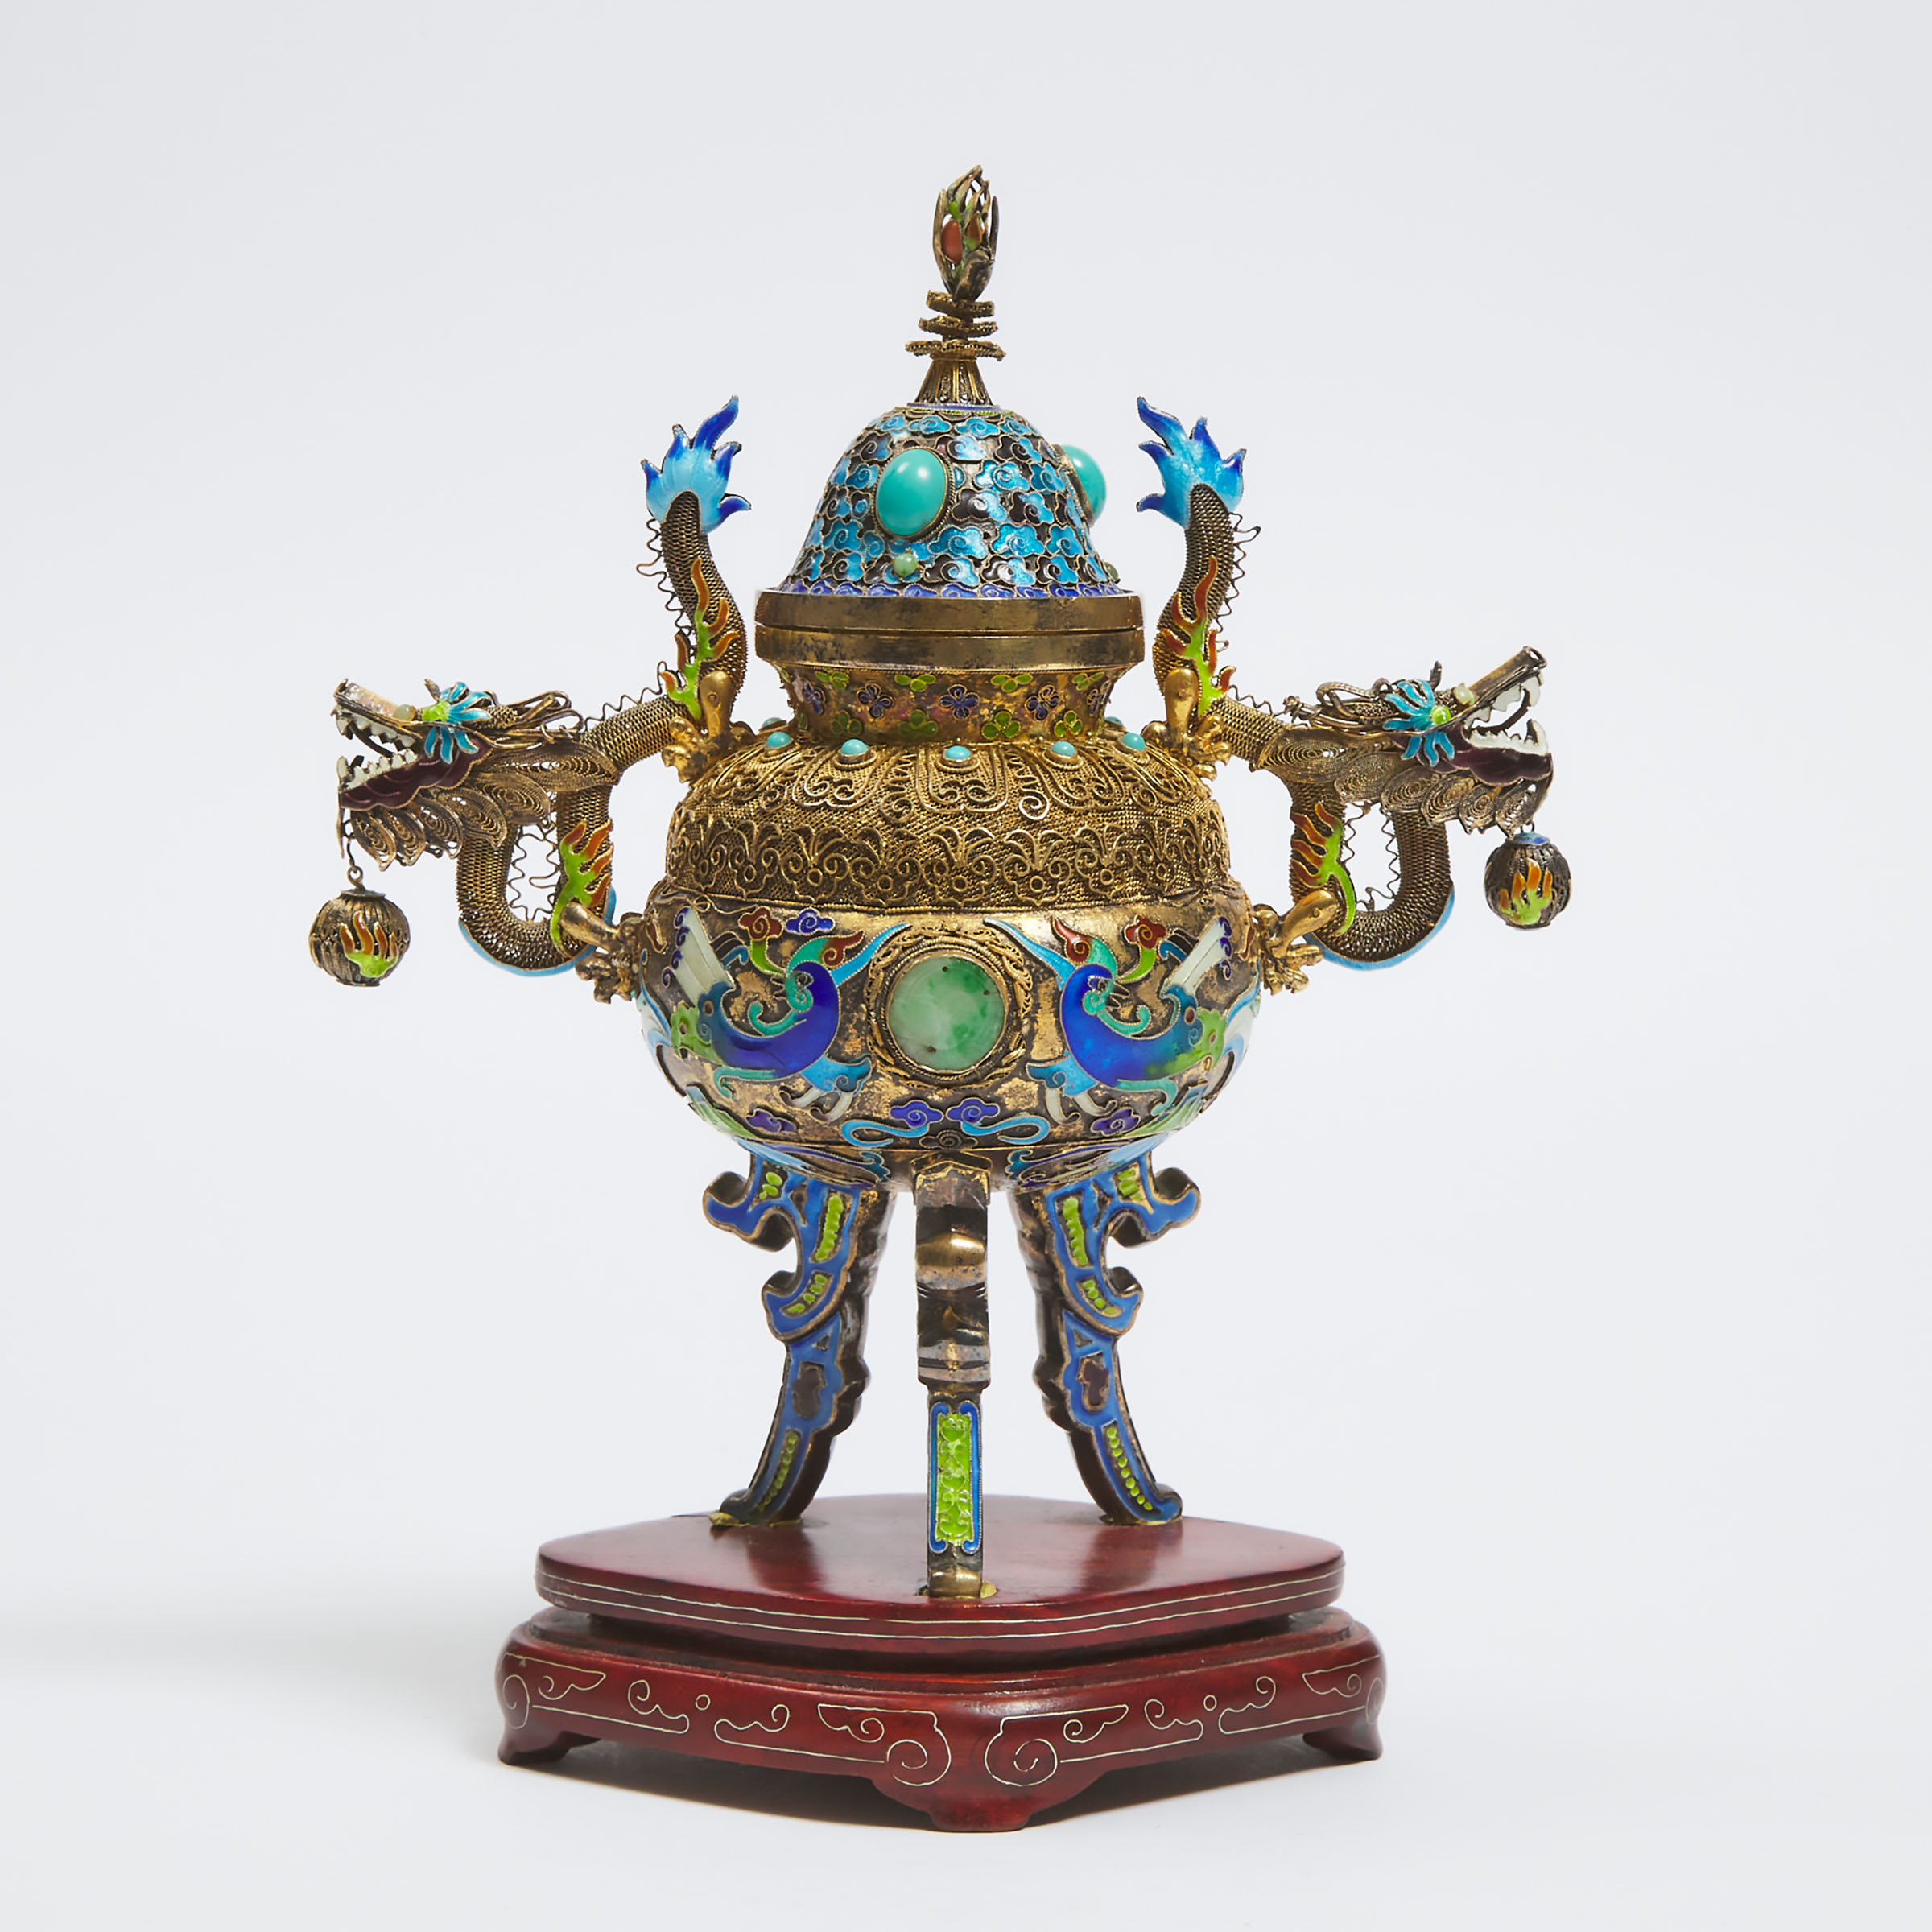 A Cloisonné Tripod Censer and Cover With Jadeite and Turquoise Inlays, Mid 20th Century